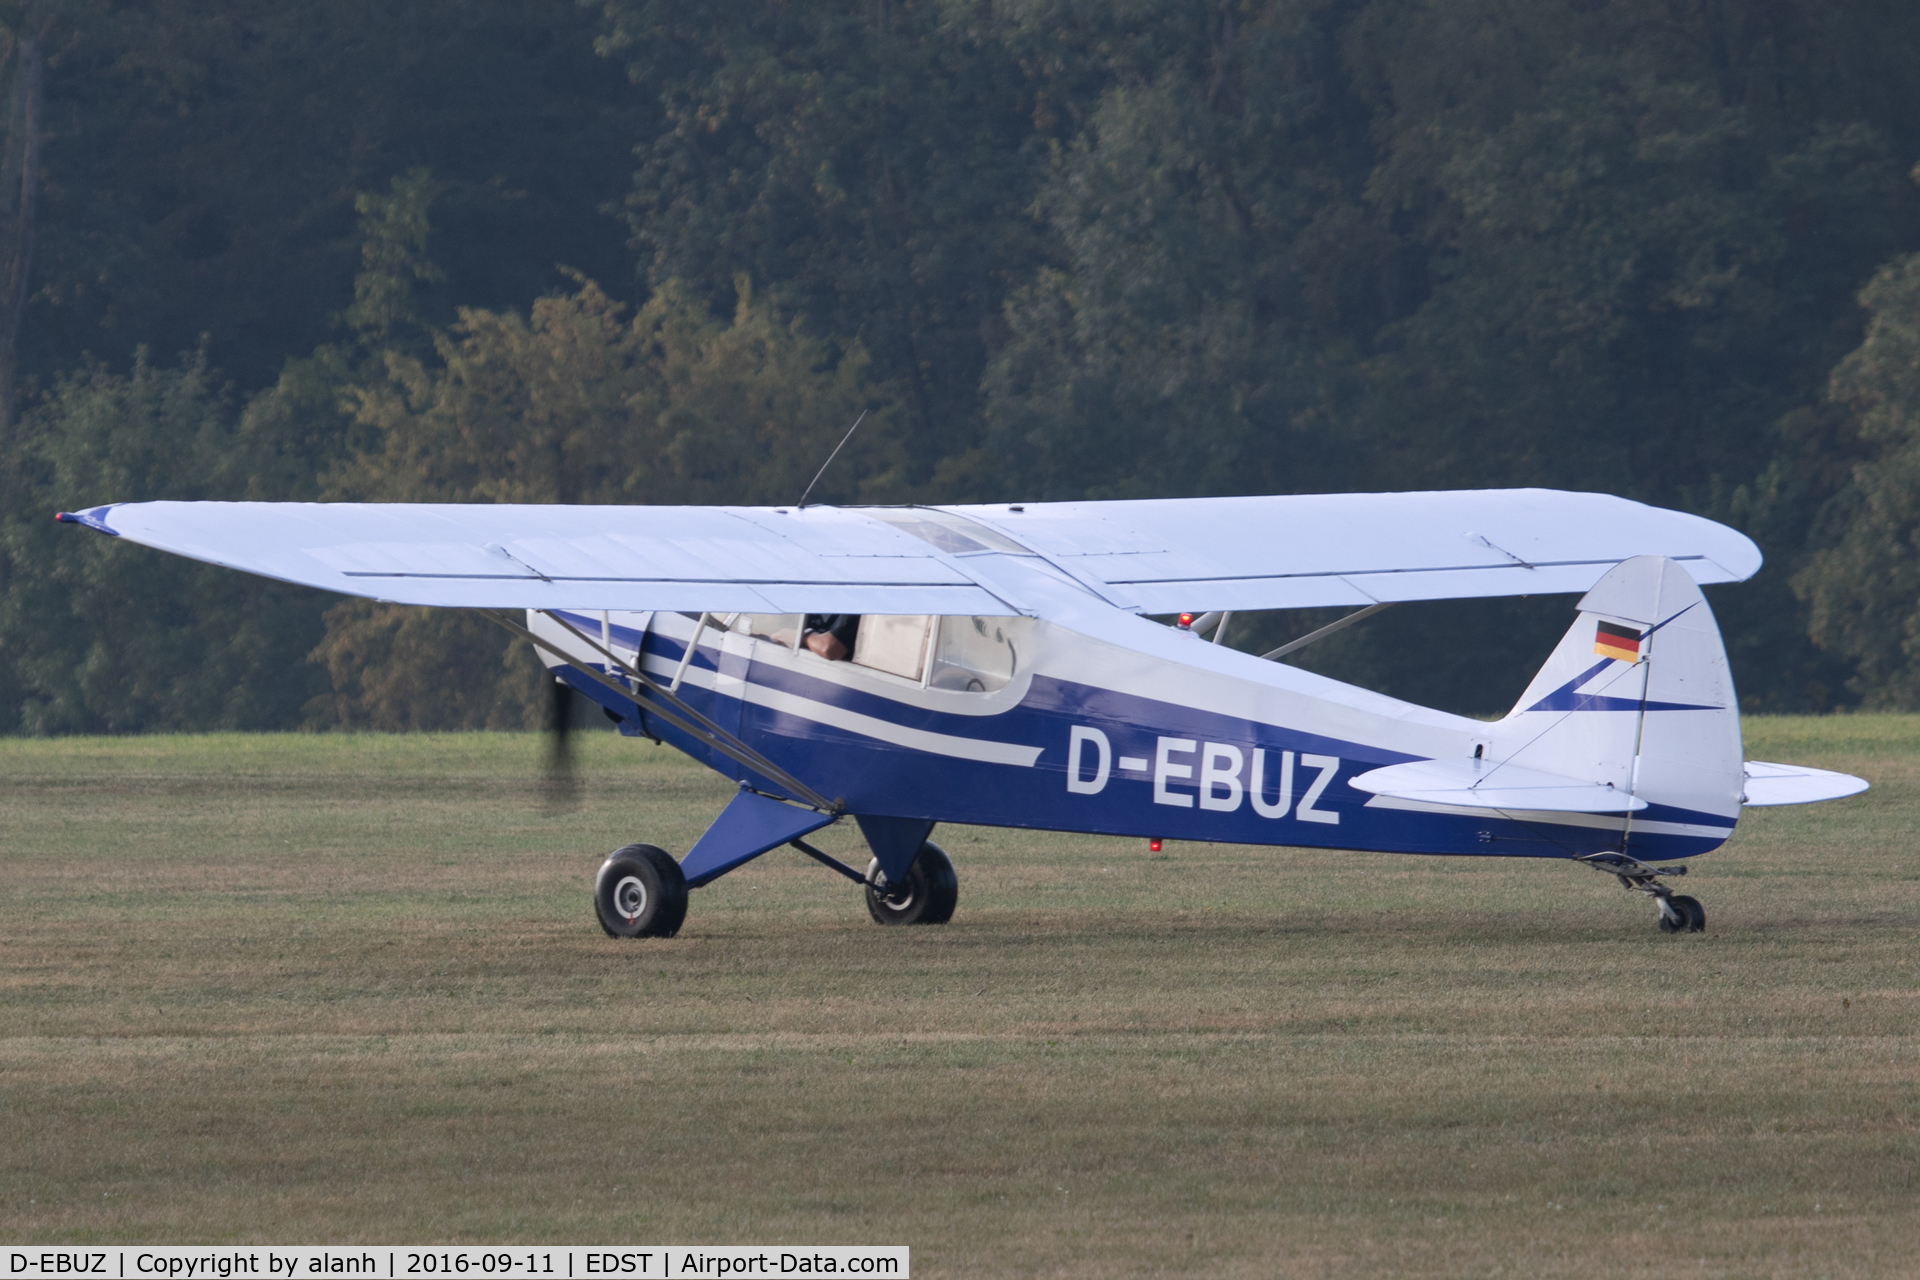 D-EBUZ, 1958 Piper PA-18-150 Super Cub Super Cub C/N 18-6769, Taxying for departure at the 2016 Hahnweide Oldtimer Fliegertreffen